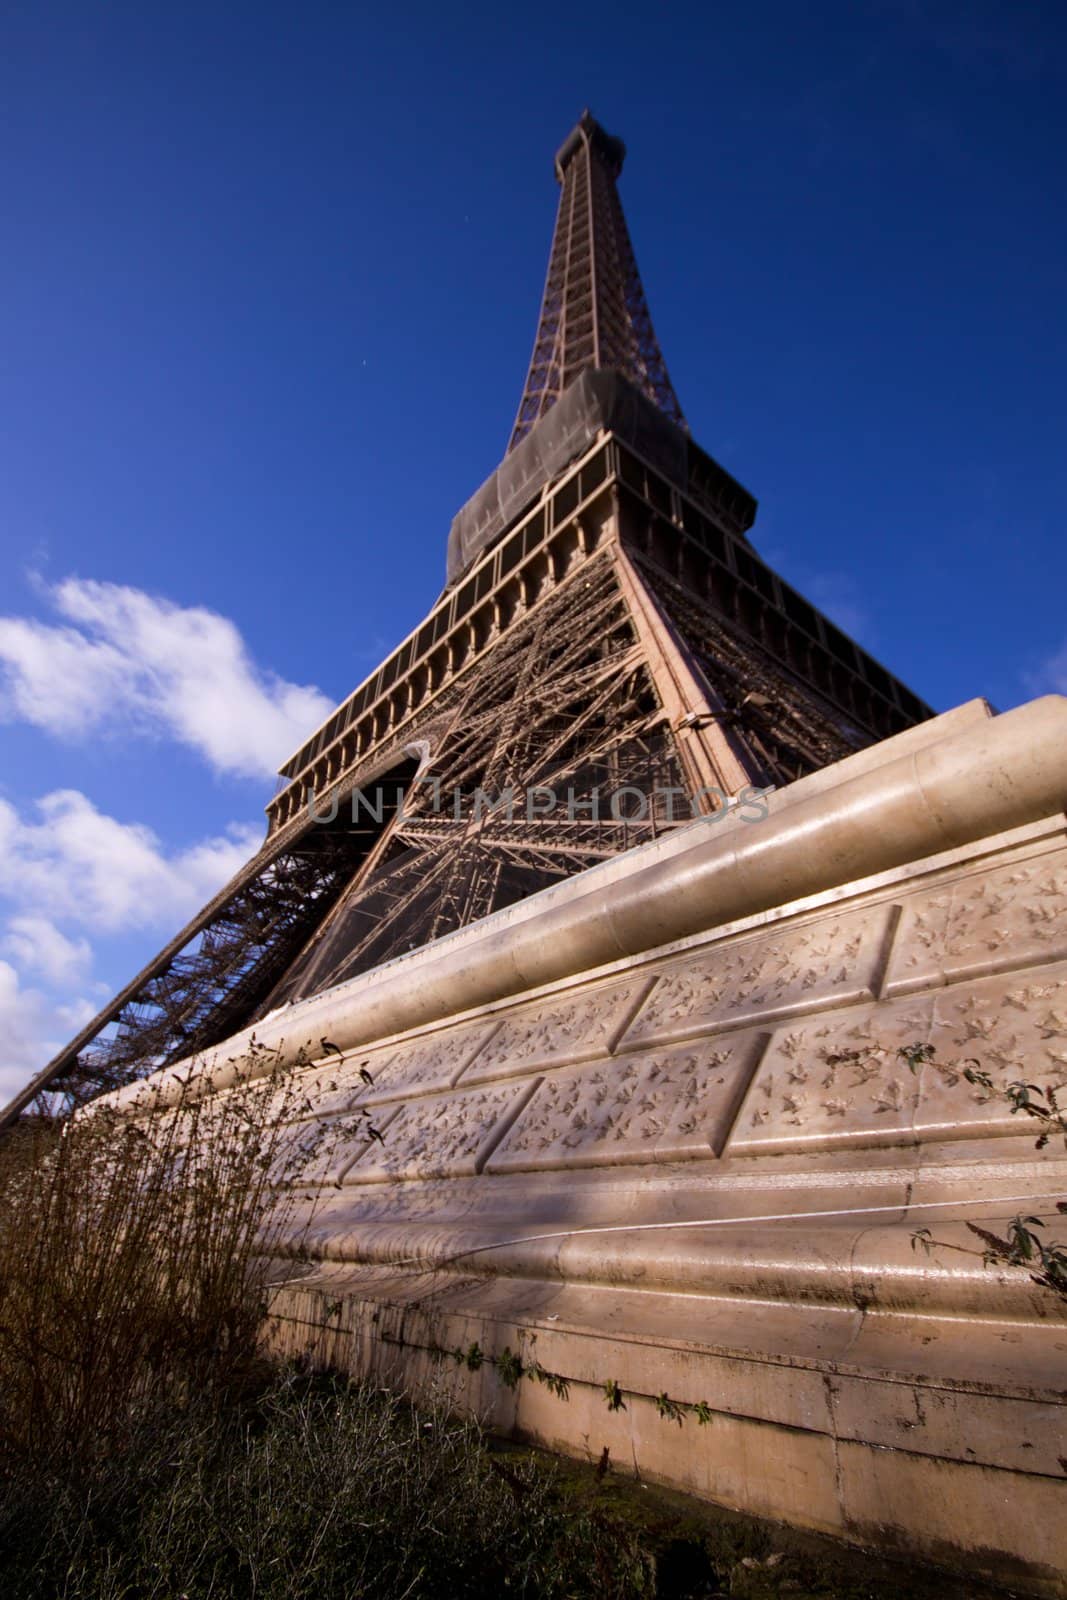 Unusual wide-angle view of Eiffel Tower in Paris